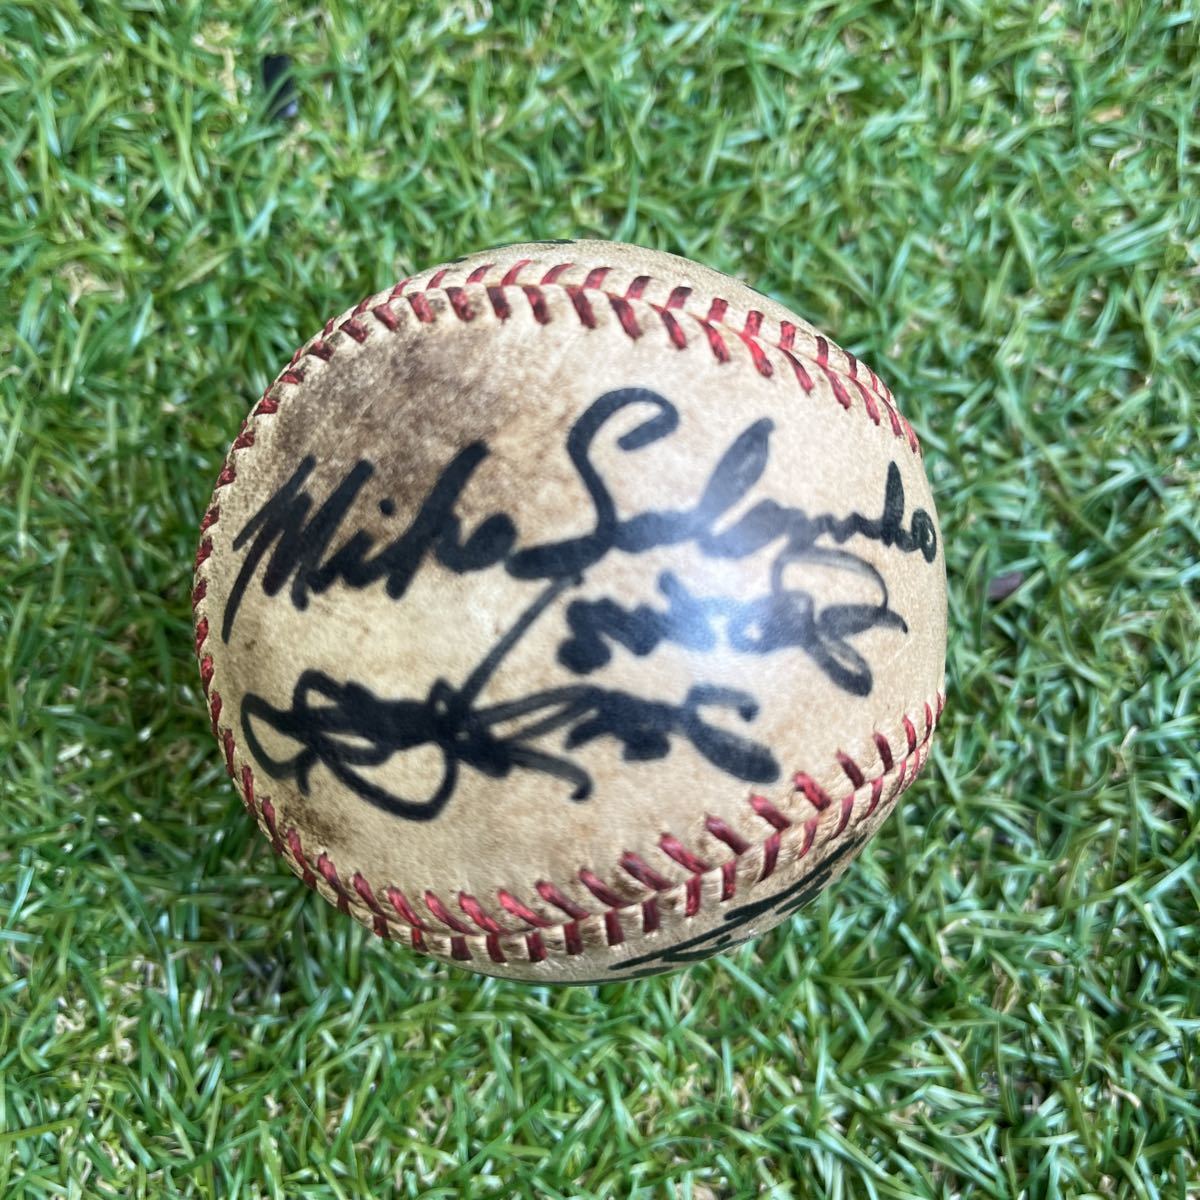  Hanshin Tigers 1962 year autograph autograph ball ( blue rice field .*. mountain real * Michael so rom ko* Yoshida . man other all 9 name )* decoration case * Japan series half ticket attaching 